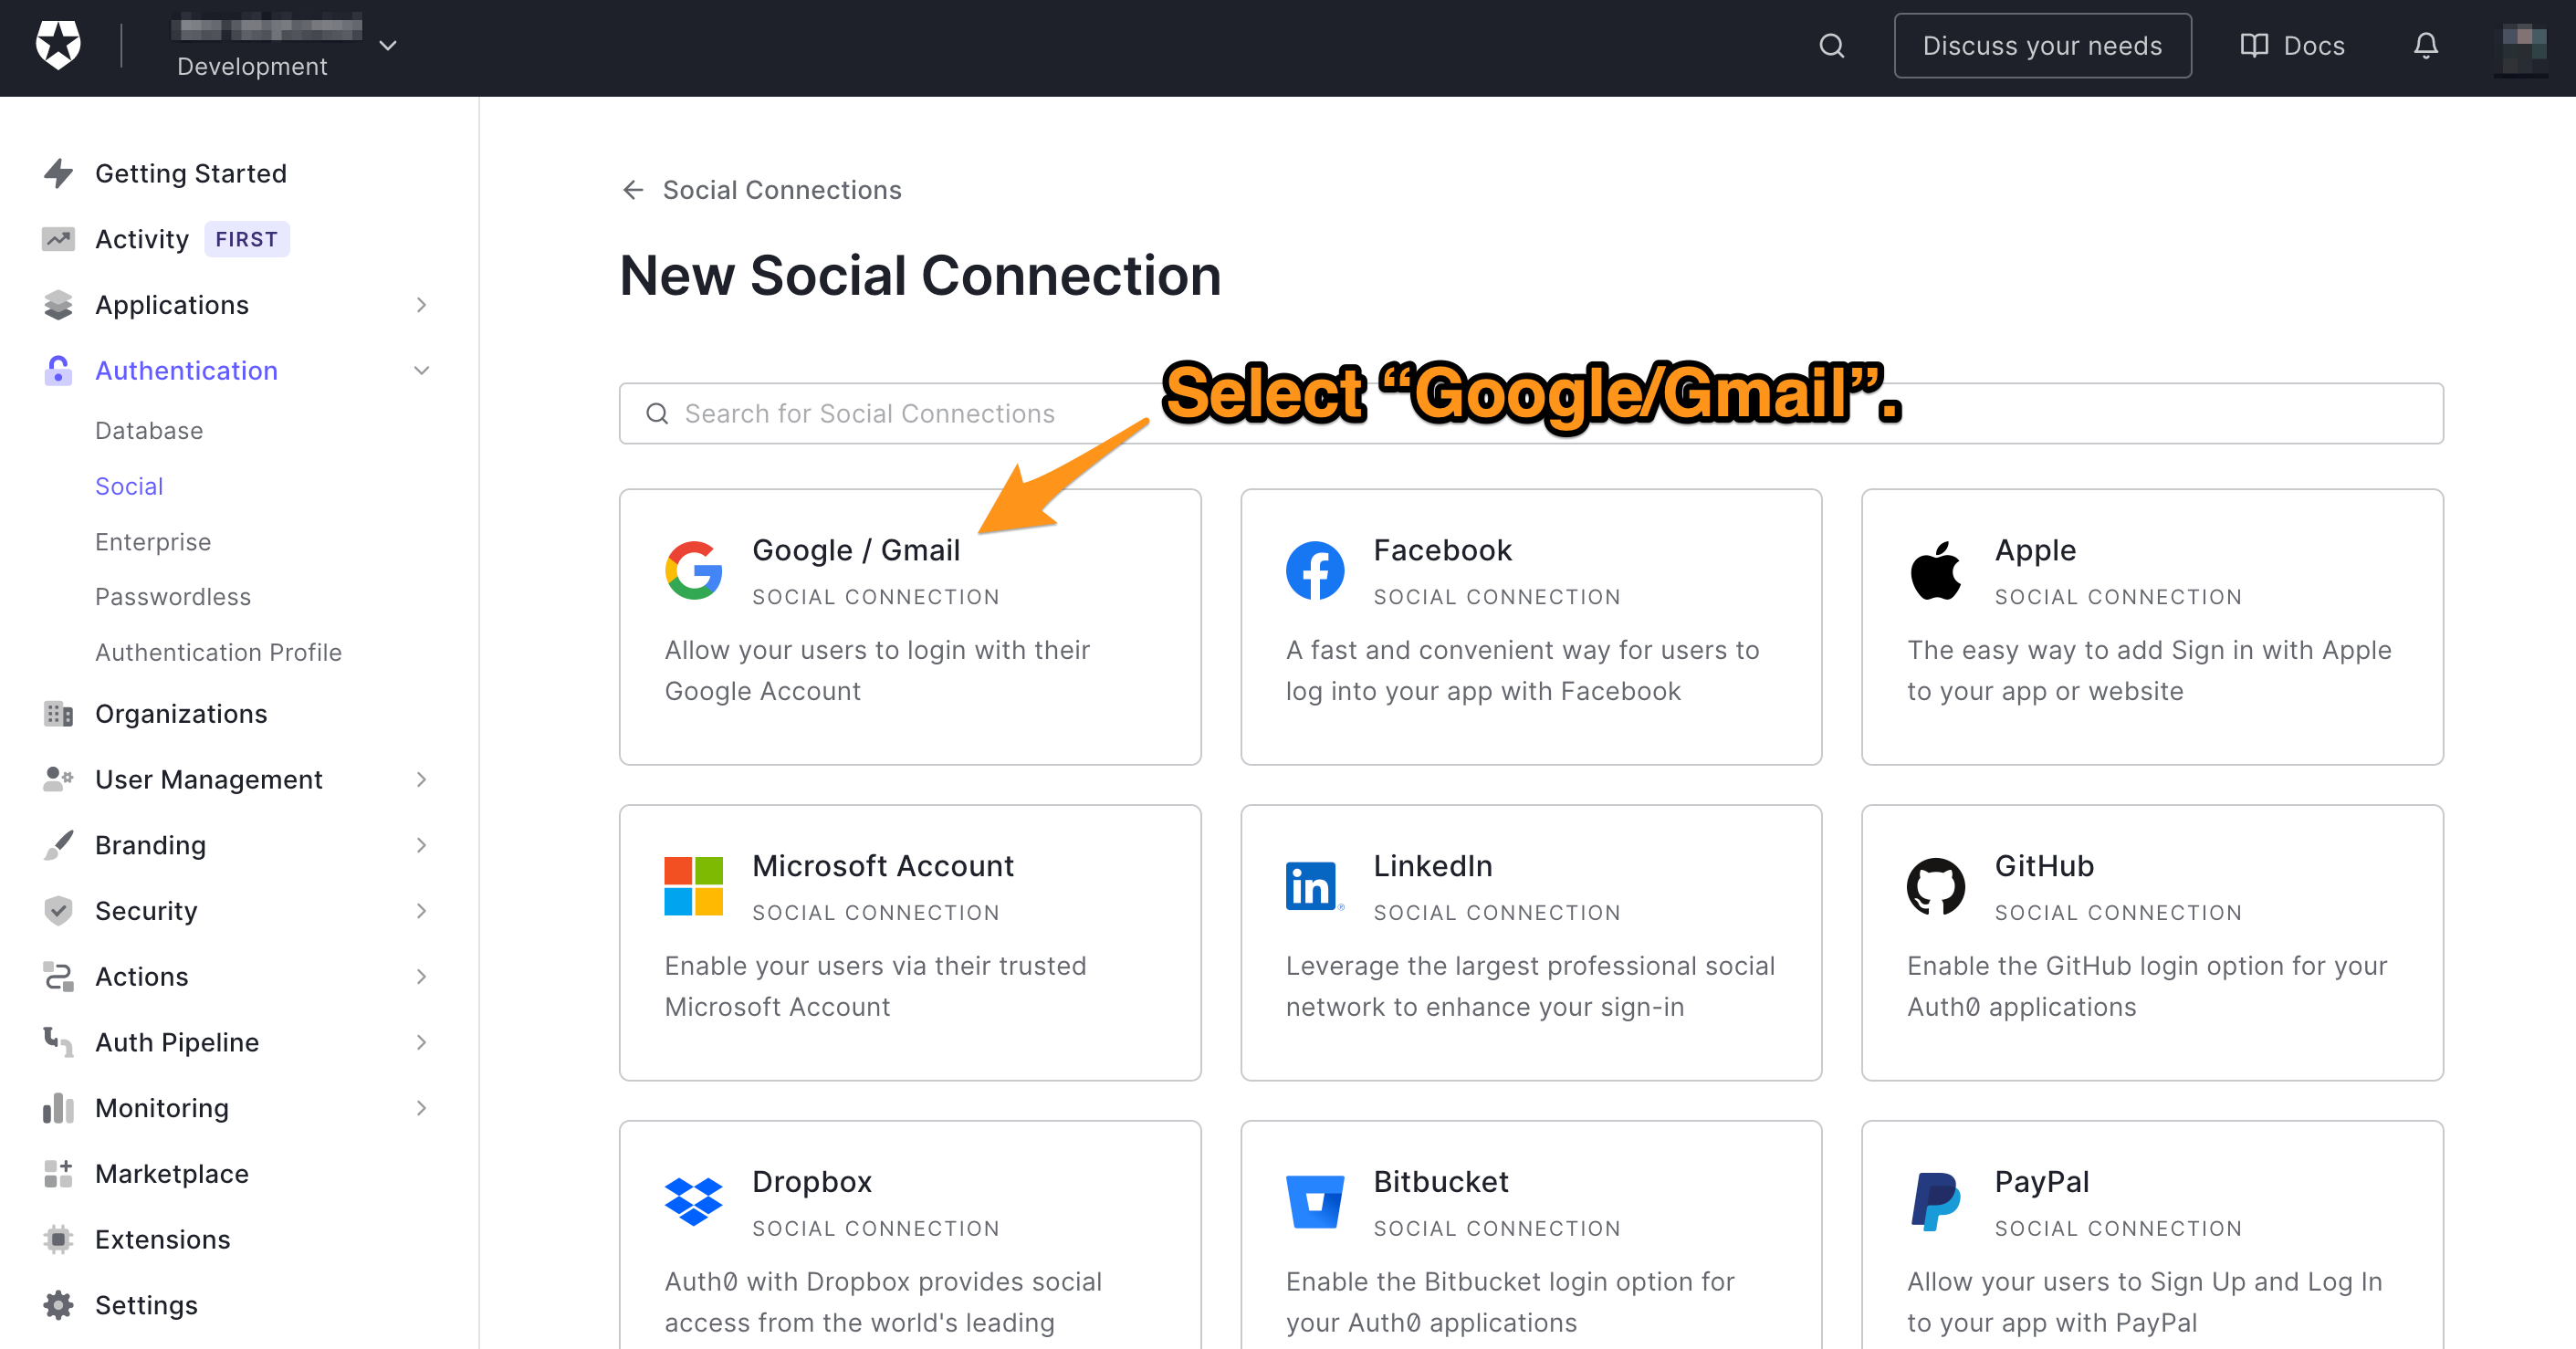 The “New Social Connection” page in the Auth0 dashboard, with instructions to create a new Google/Gmail connection.